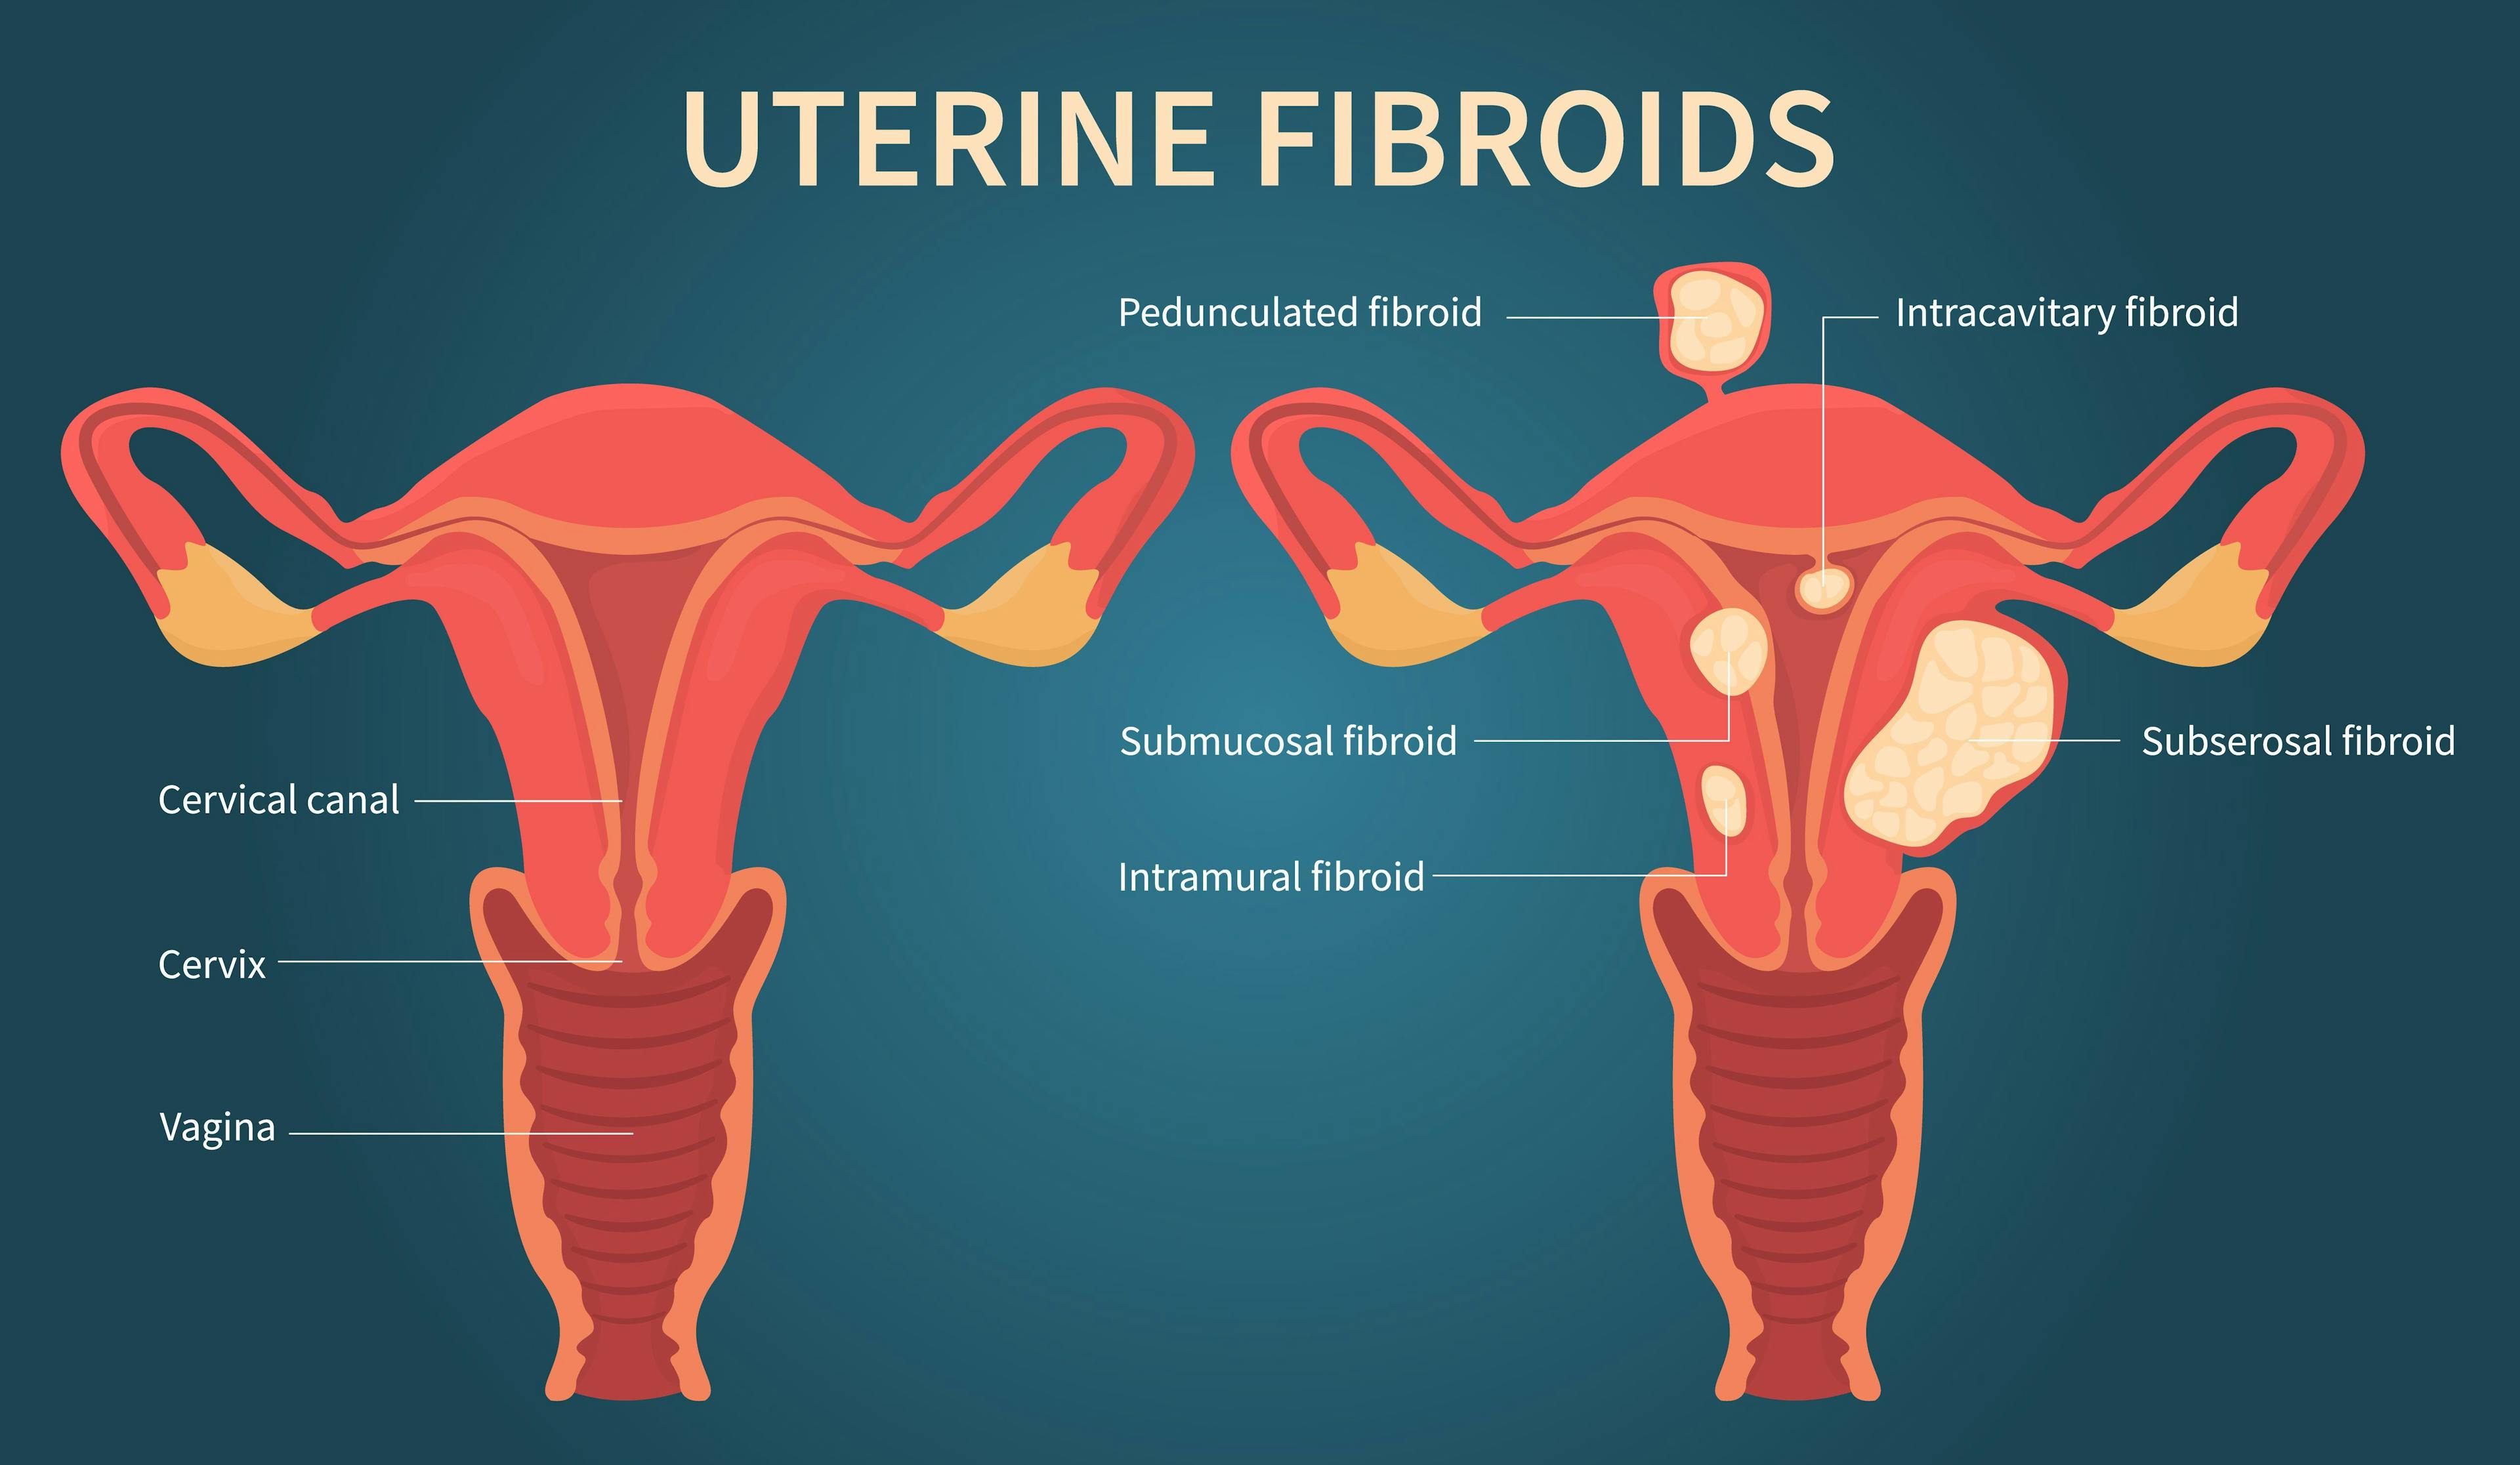 Clinical practice and research yields valuable data for management of uterine fibroids